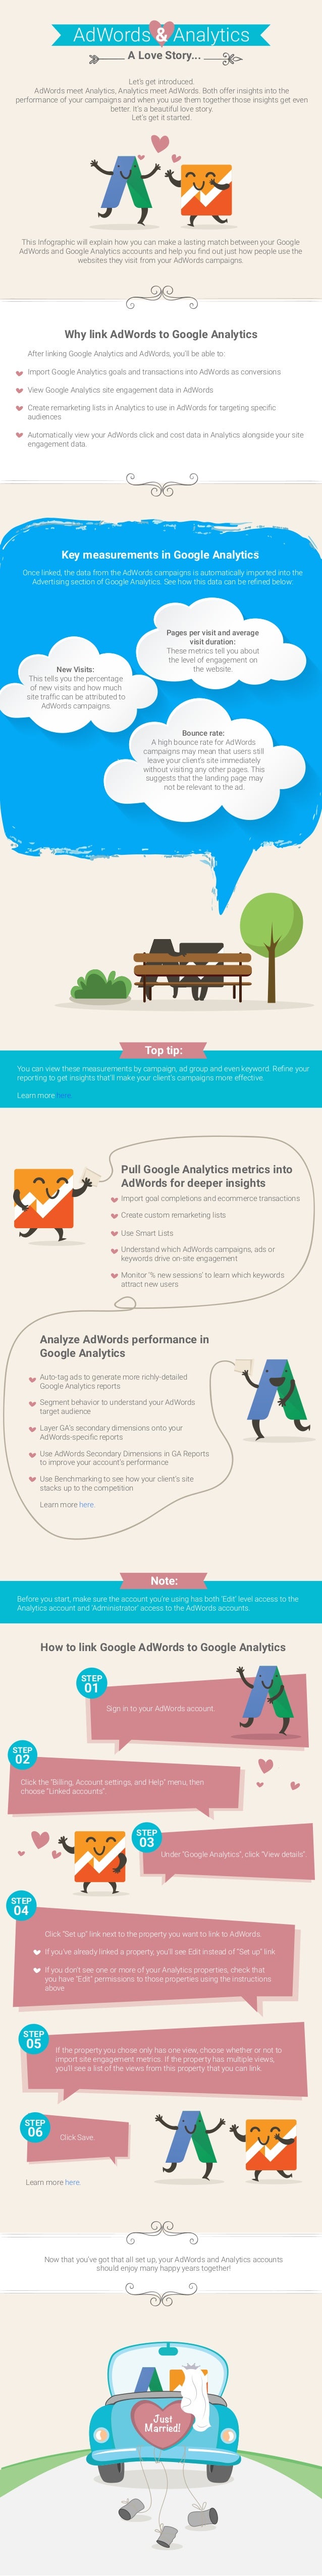 AdWords & Analytics A Love Story Let s introduced AdWords meet Analytics